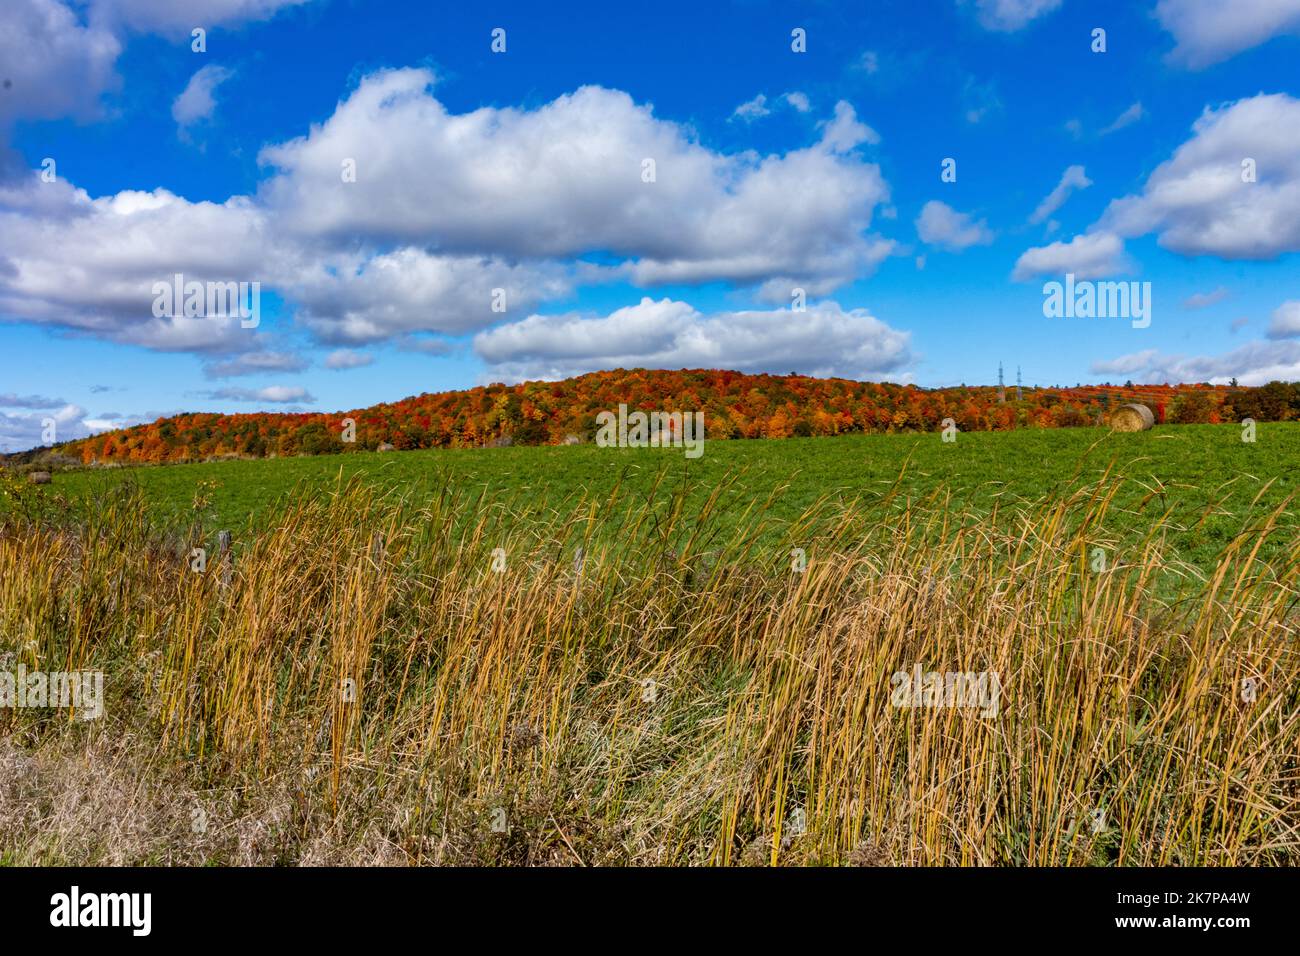 A grass field with hay bales sits in front of rolling autumn hills filled with dazzling colors; layers of grass, field, hills and cloud. Stock Photo